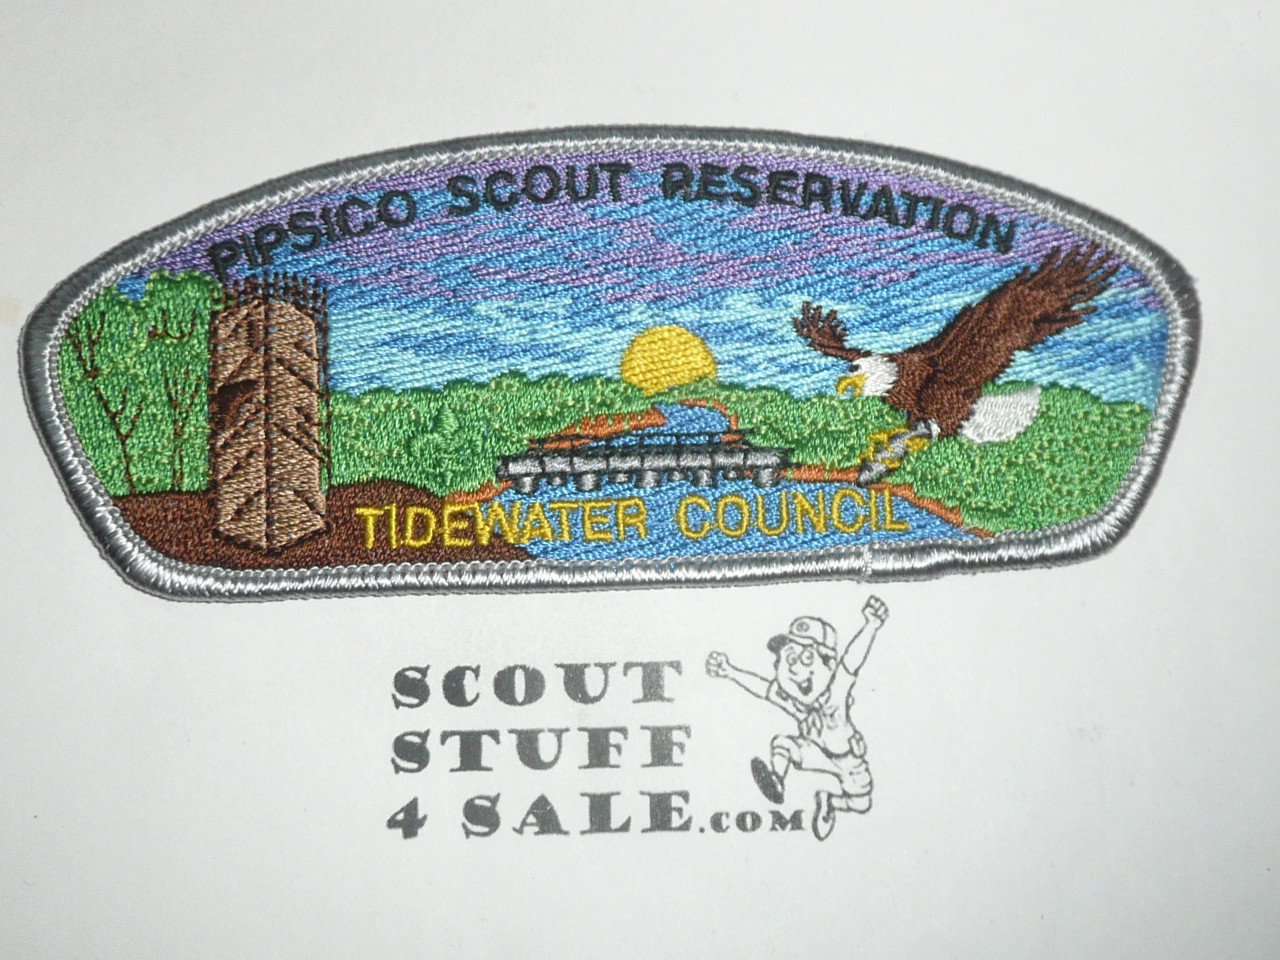 Tidewater Council sa26 CSP - Pipsico Scout Reservation